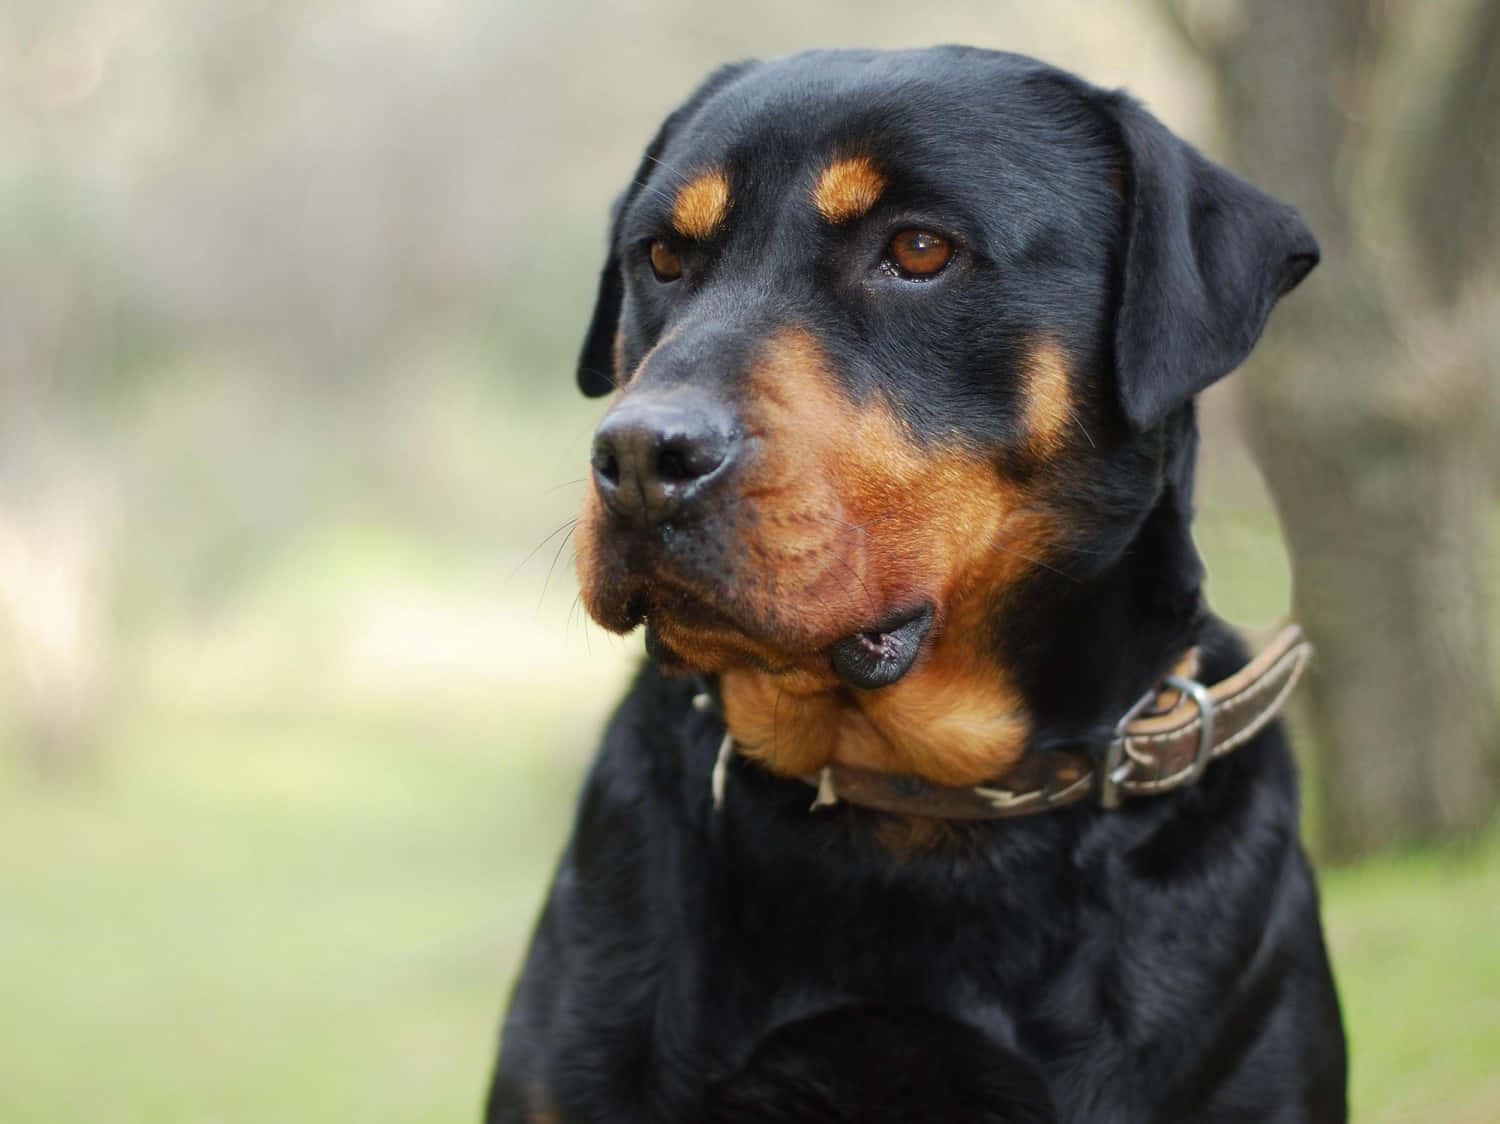 A loyal companion, a Rottweiler watches over its master.